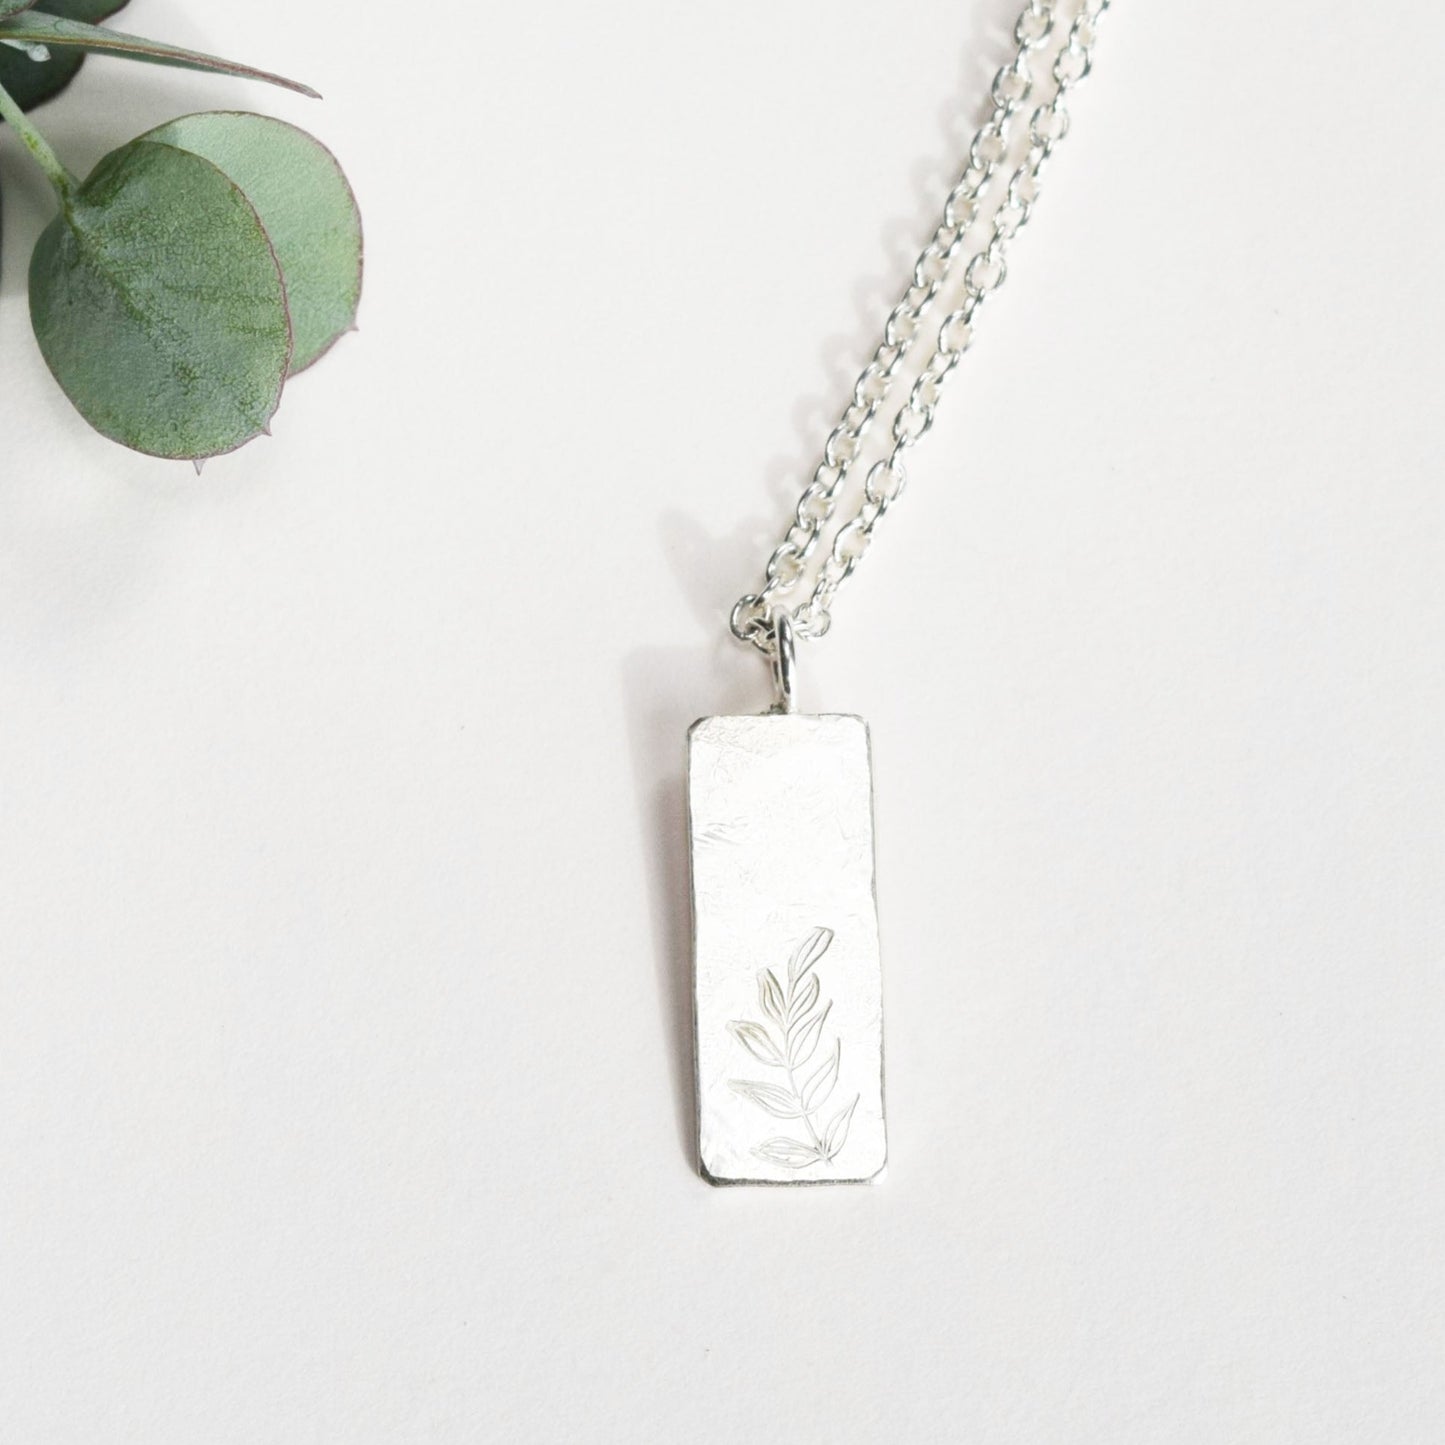 back to nature necklace on white background